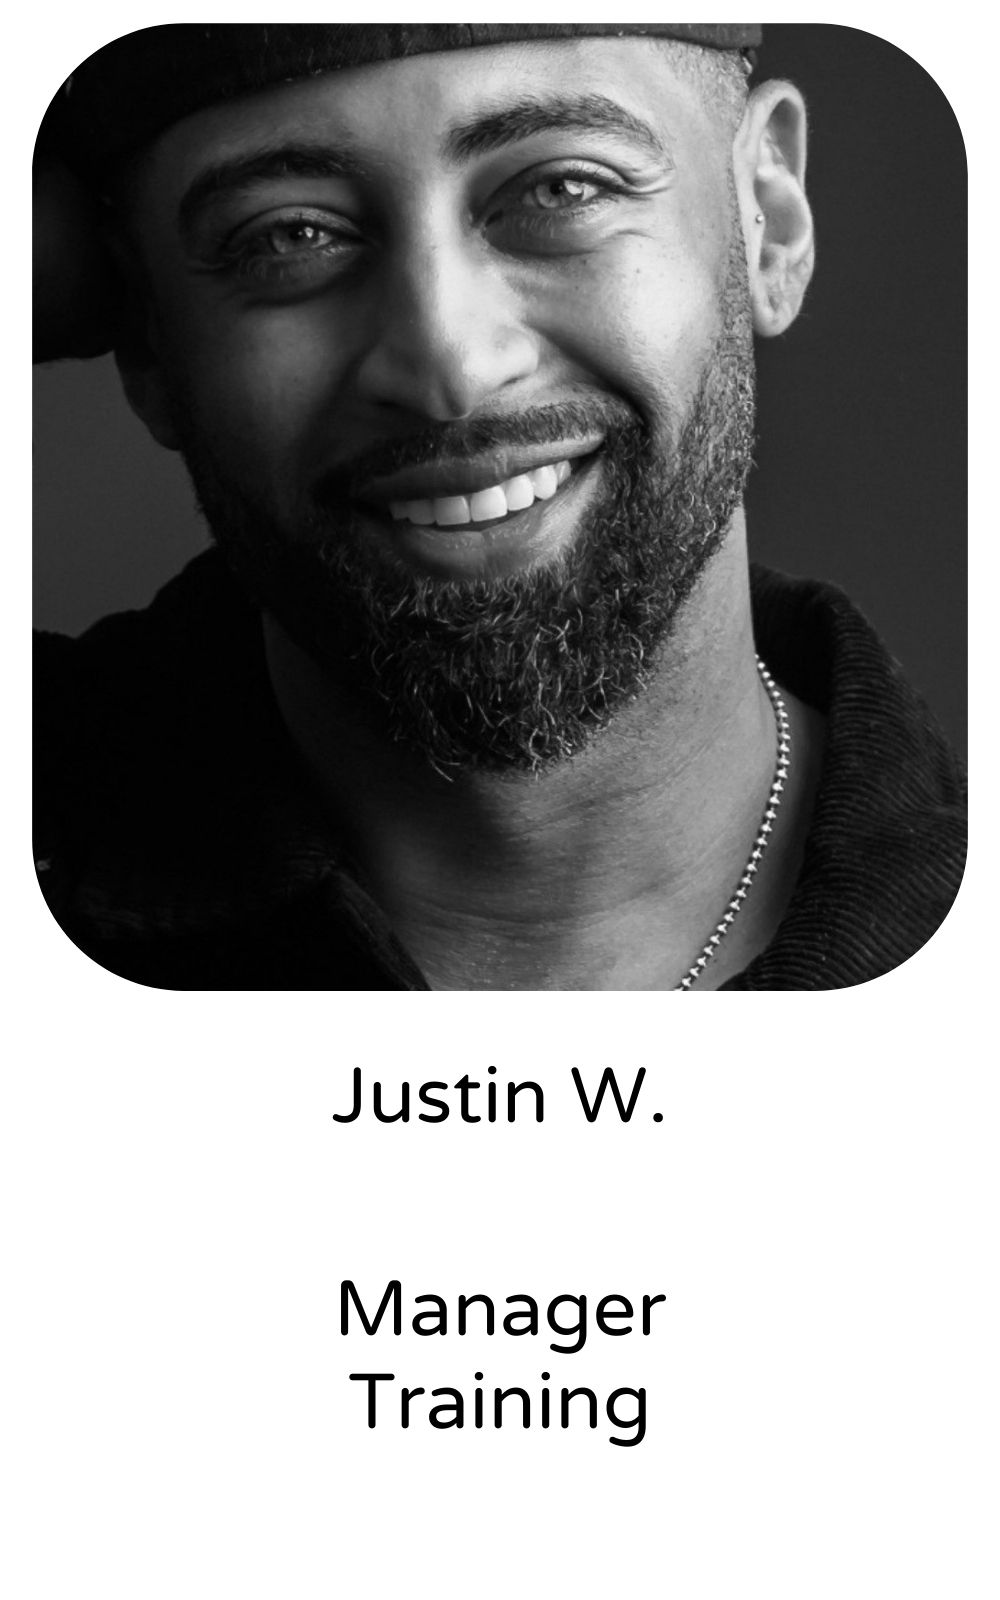 Justin W, Manager, Training